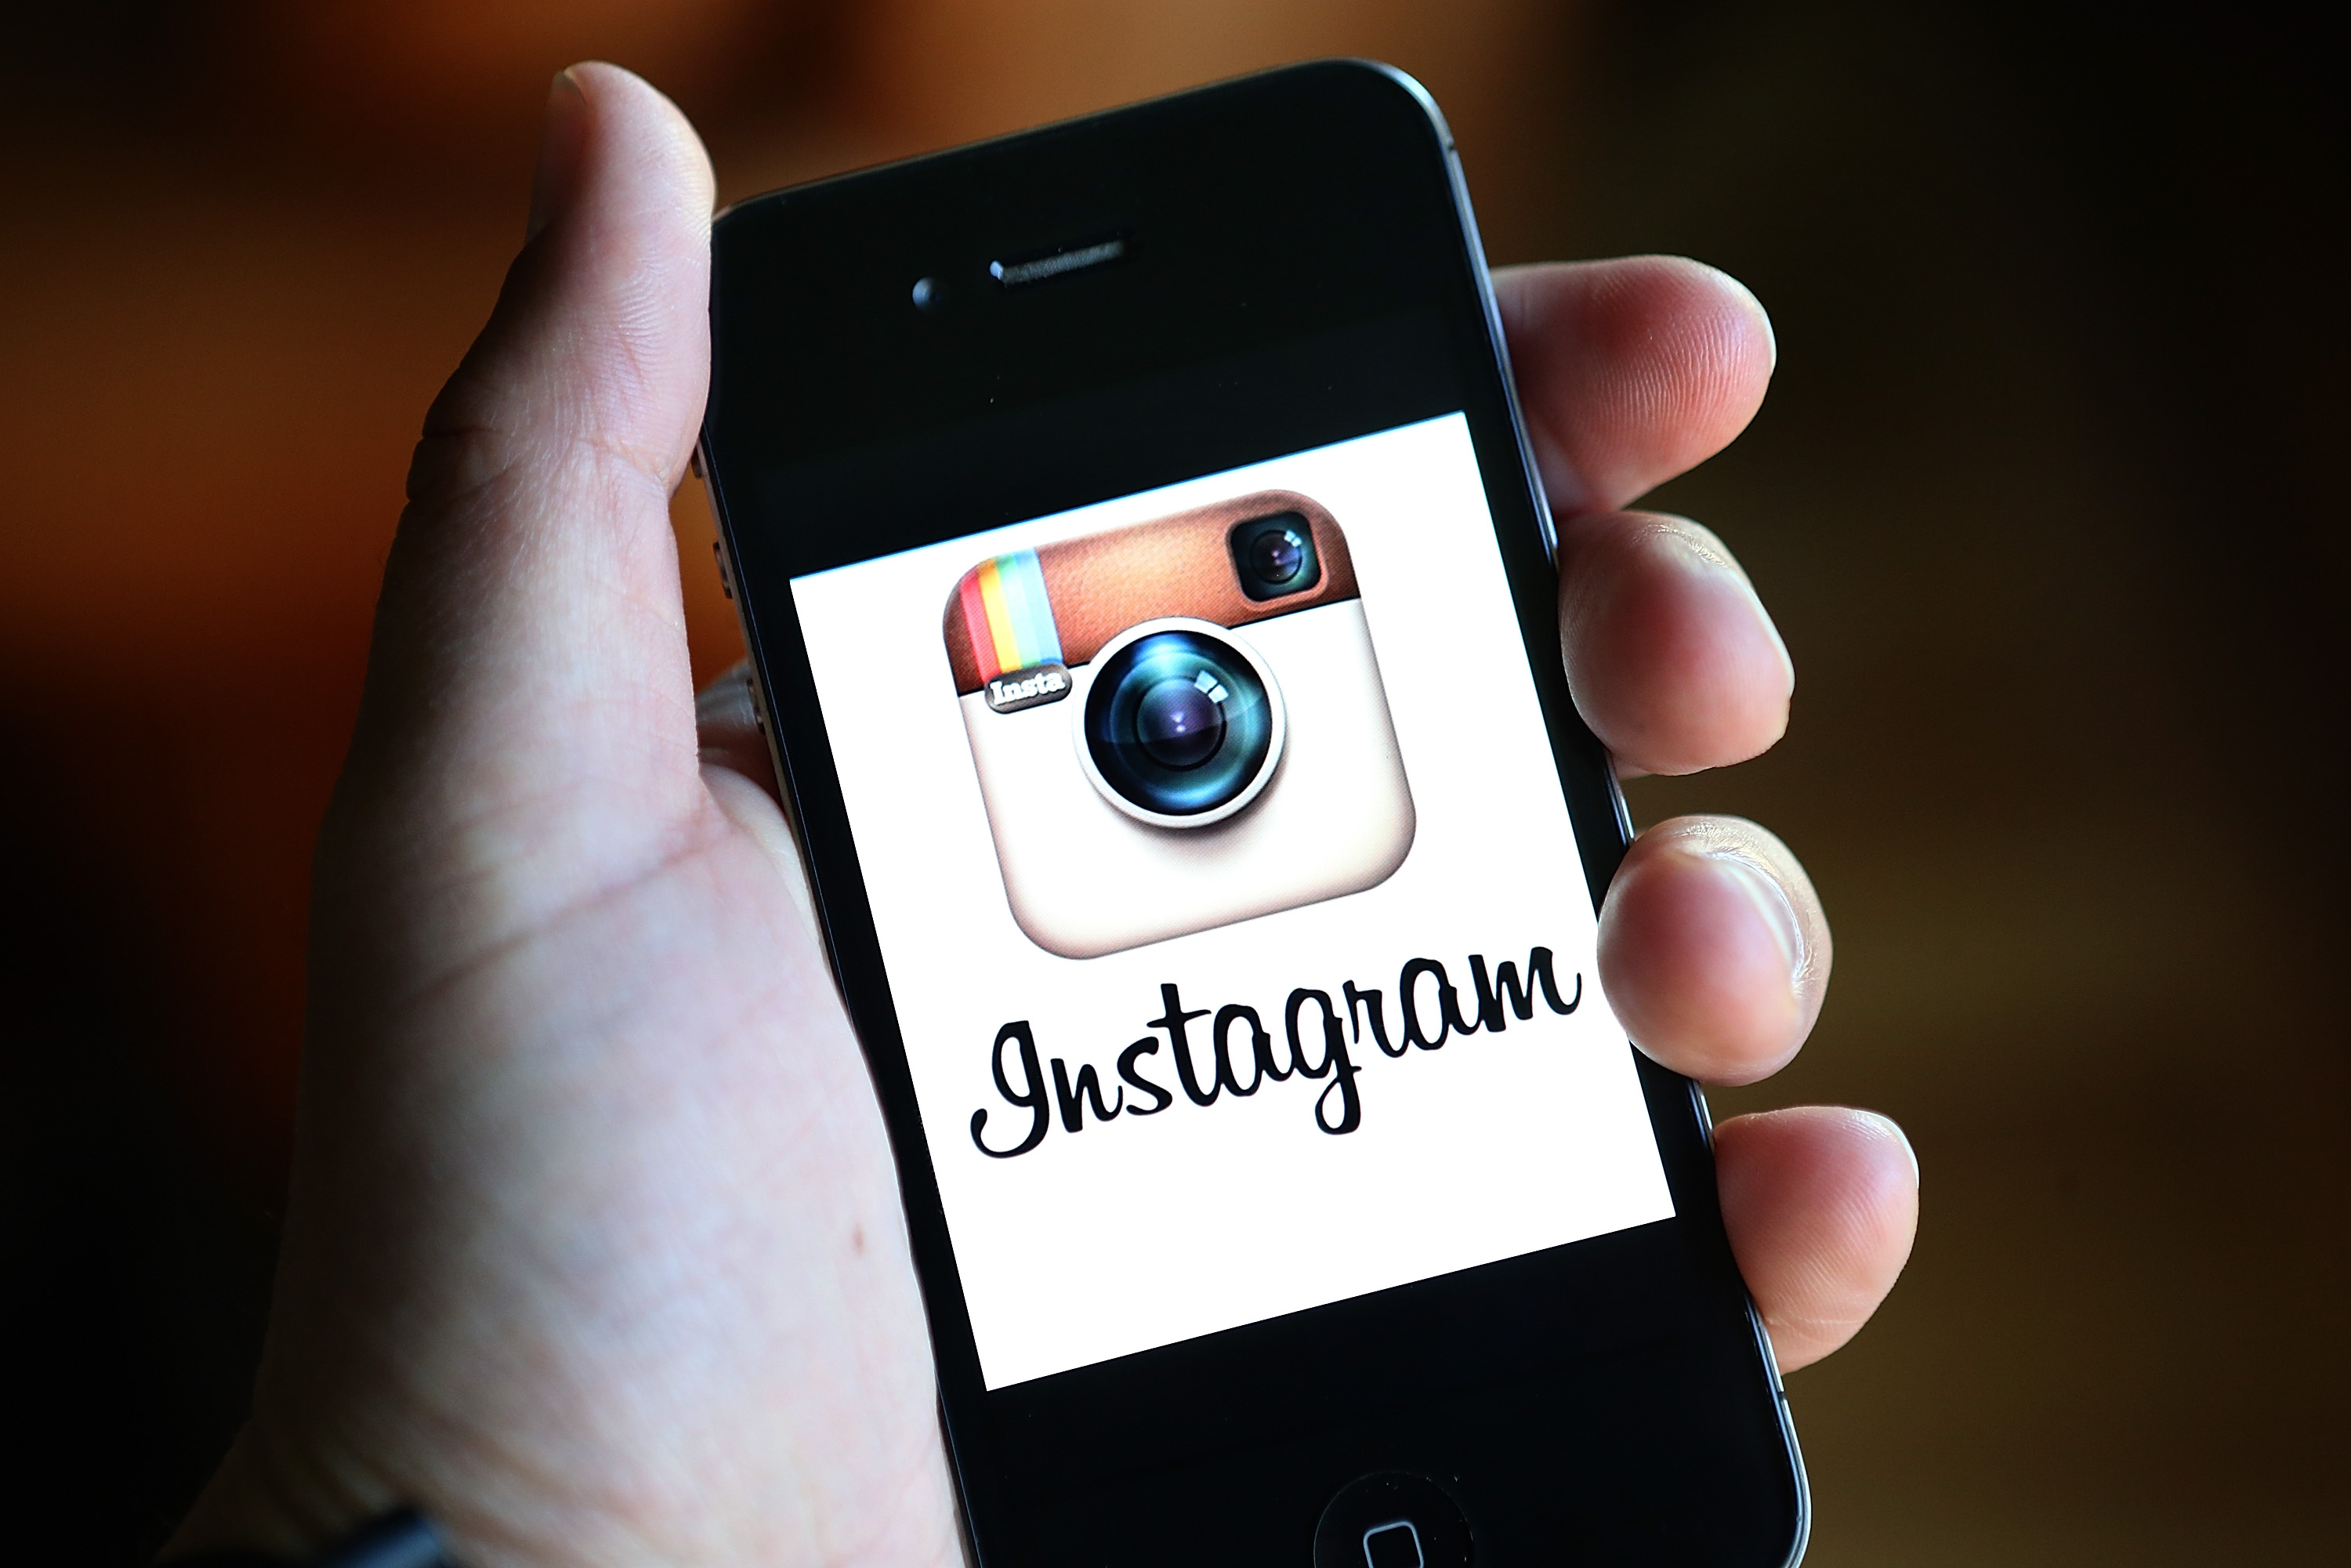 The Instagram logo is displayed on an Apple iPhone on Dec. 18, 2012 in Fairfax, Calif. (Justin Sullivan—Getty Images)